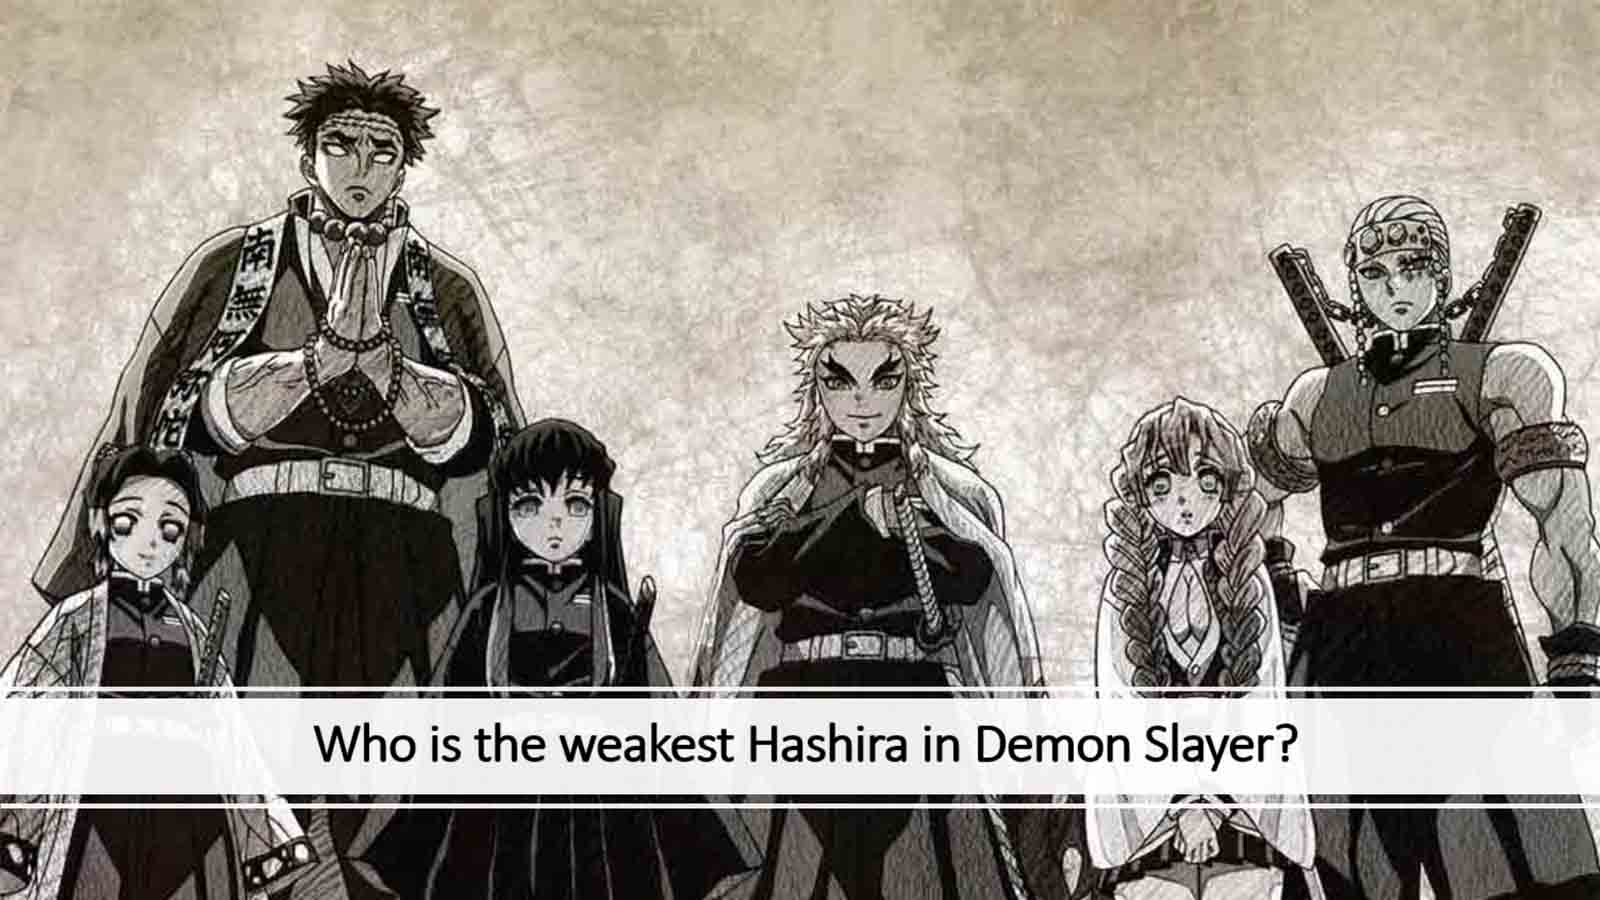 Image of all the Hashira in Demon Slayer with the caption of who is the weakest in the group